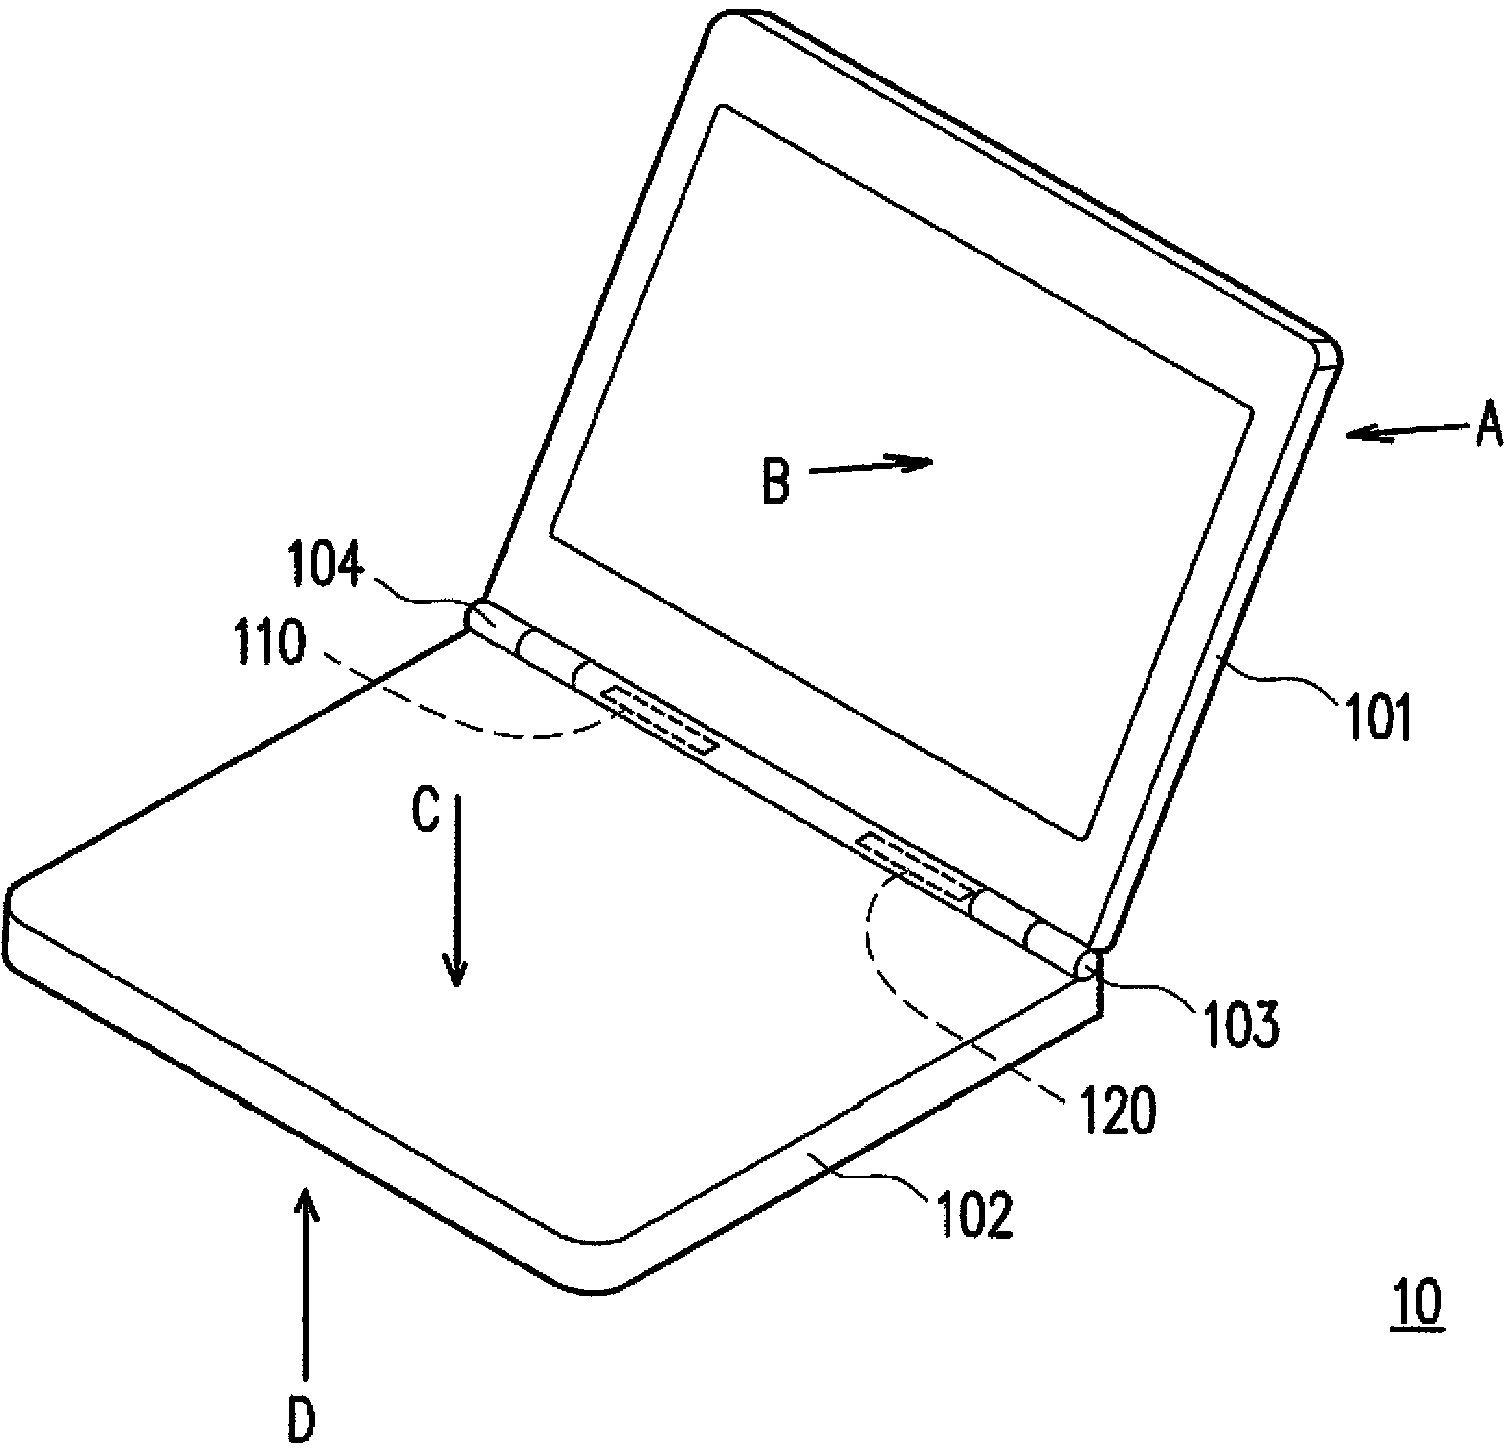 An electronic device containing a planar inverted F antenna with dual parasitic elements